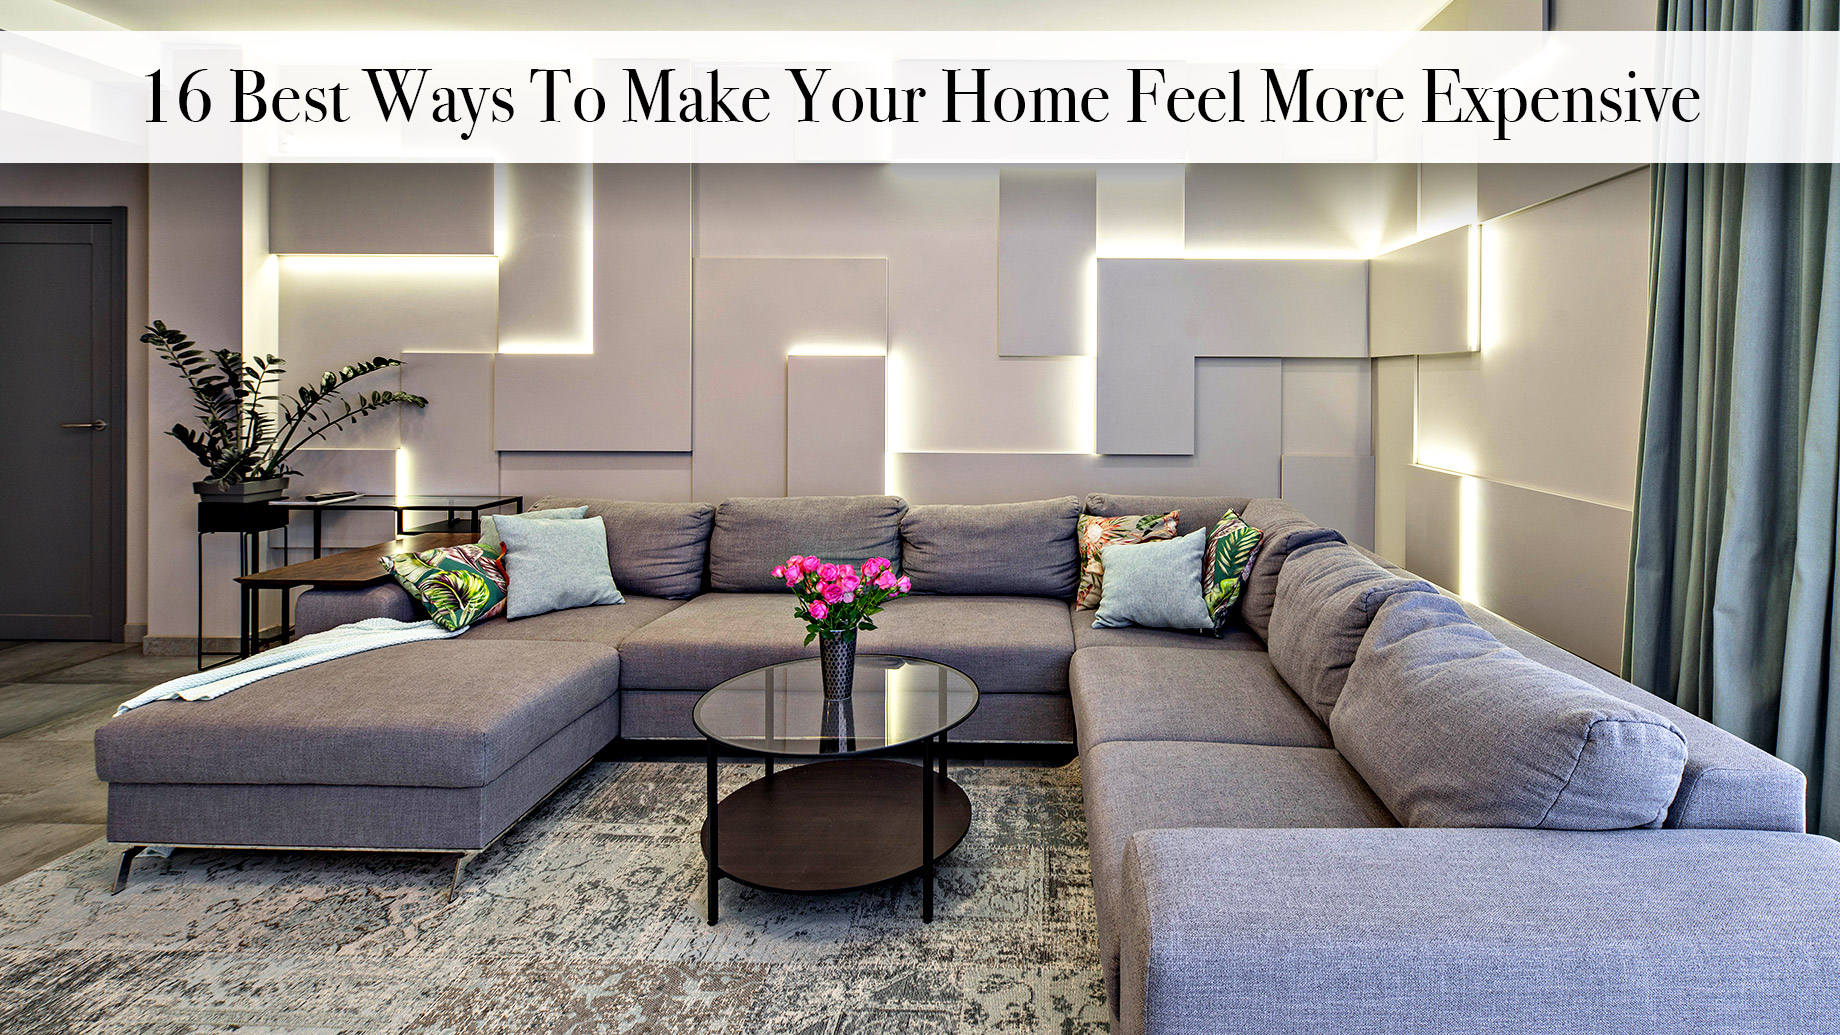 16 Best Ways To Make Your Home Feel More Expensive